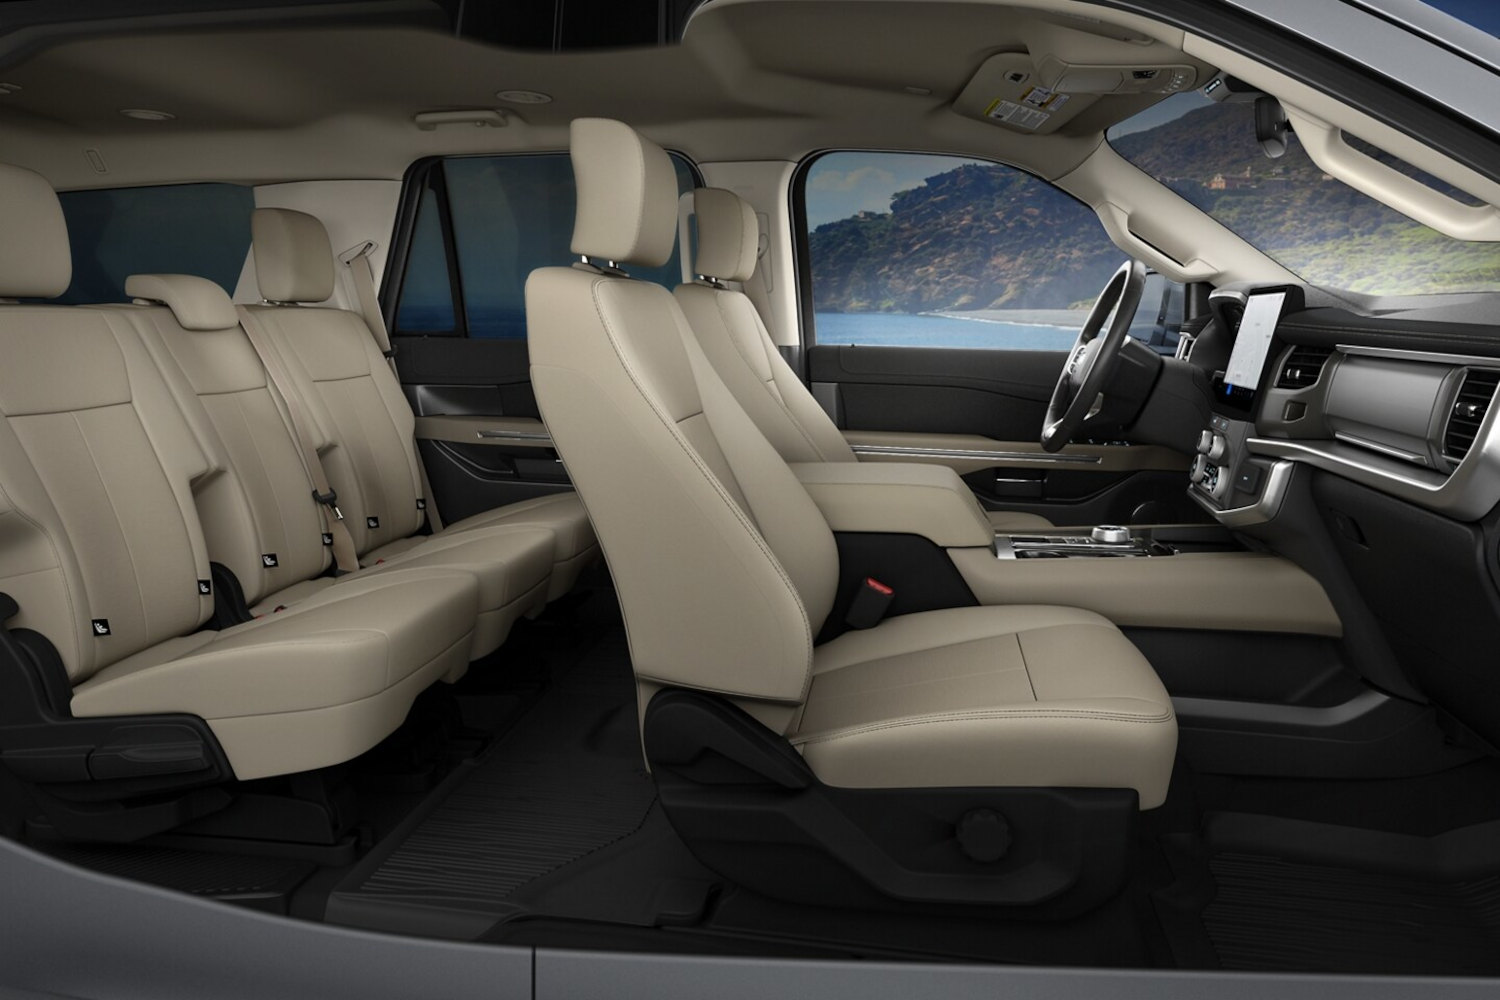 Inside the large Ford Expedition SUV